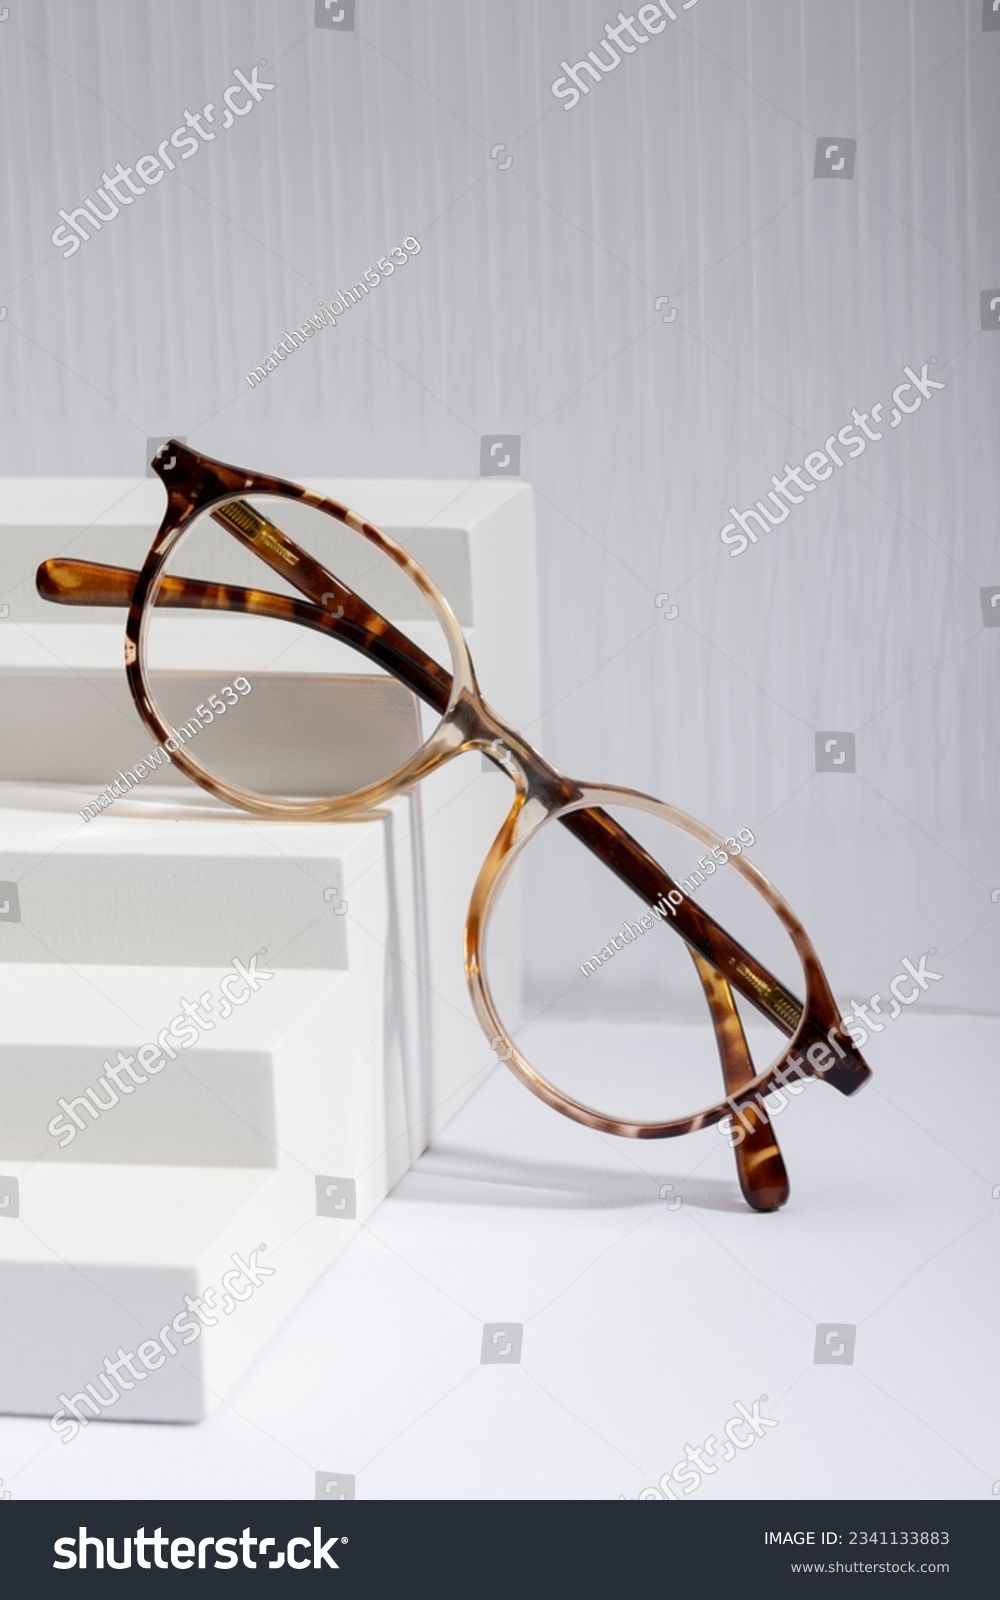 Sunglasses and glasses sale concept. Trendy sunglasses background. Trendy Fashion summer accessories. Copy space for text. Summer sale. Optic store discount poster. glasses with rounded frames. #2341133883